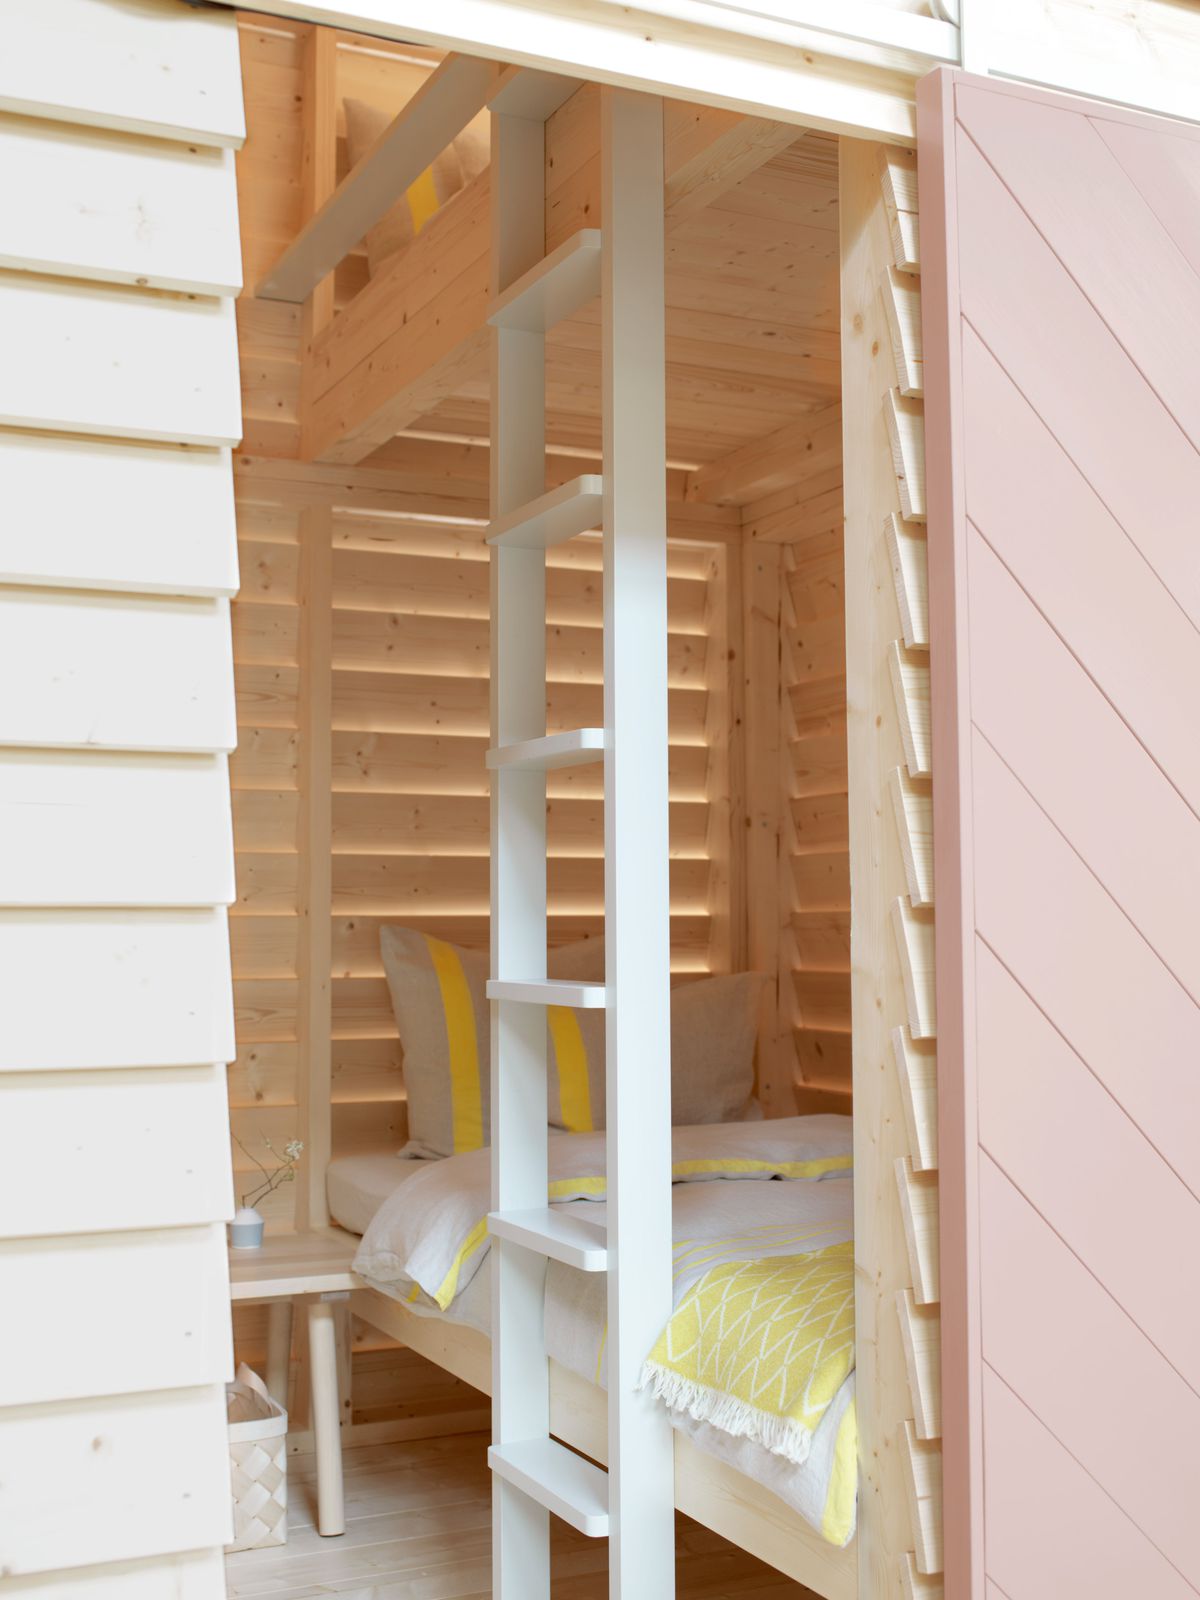 This new hotel in Paris consists of six adorable Finnish cottages - Curbed